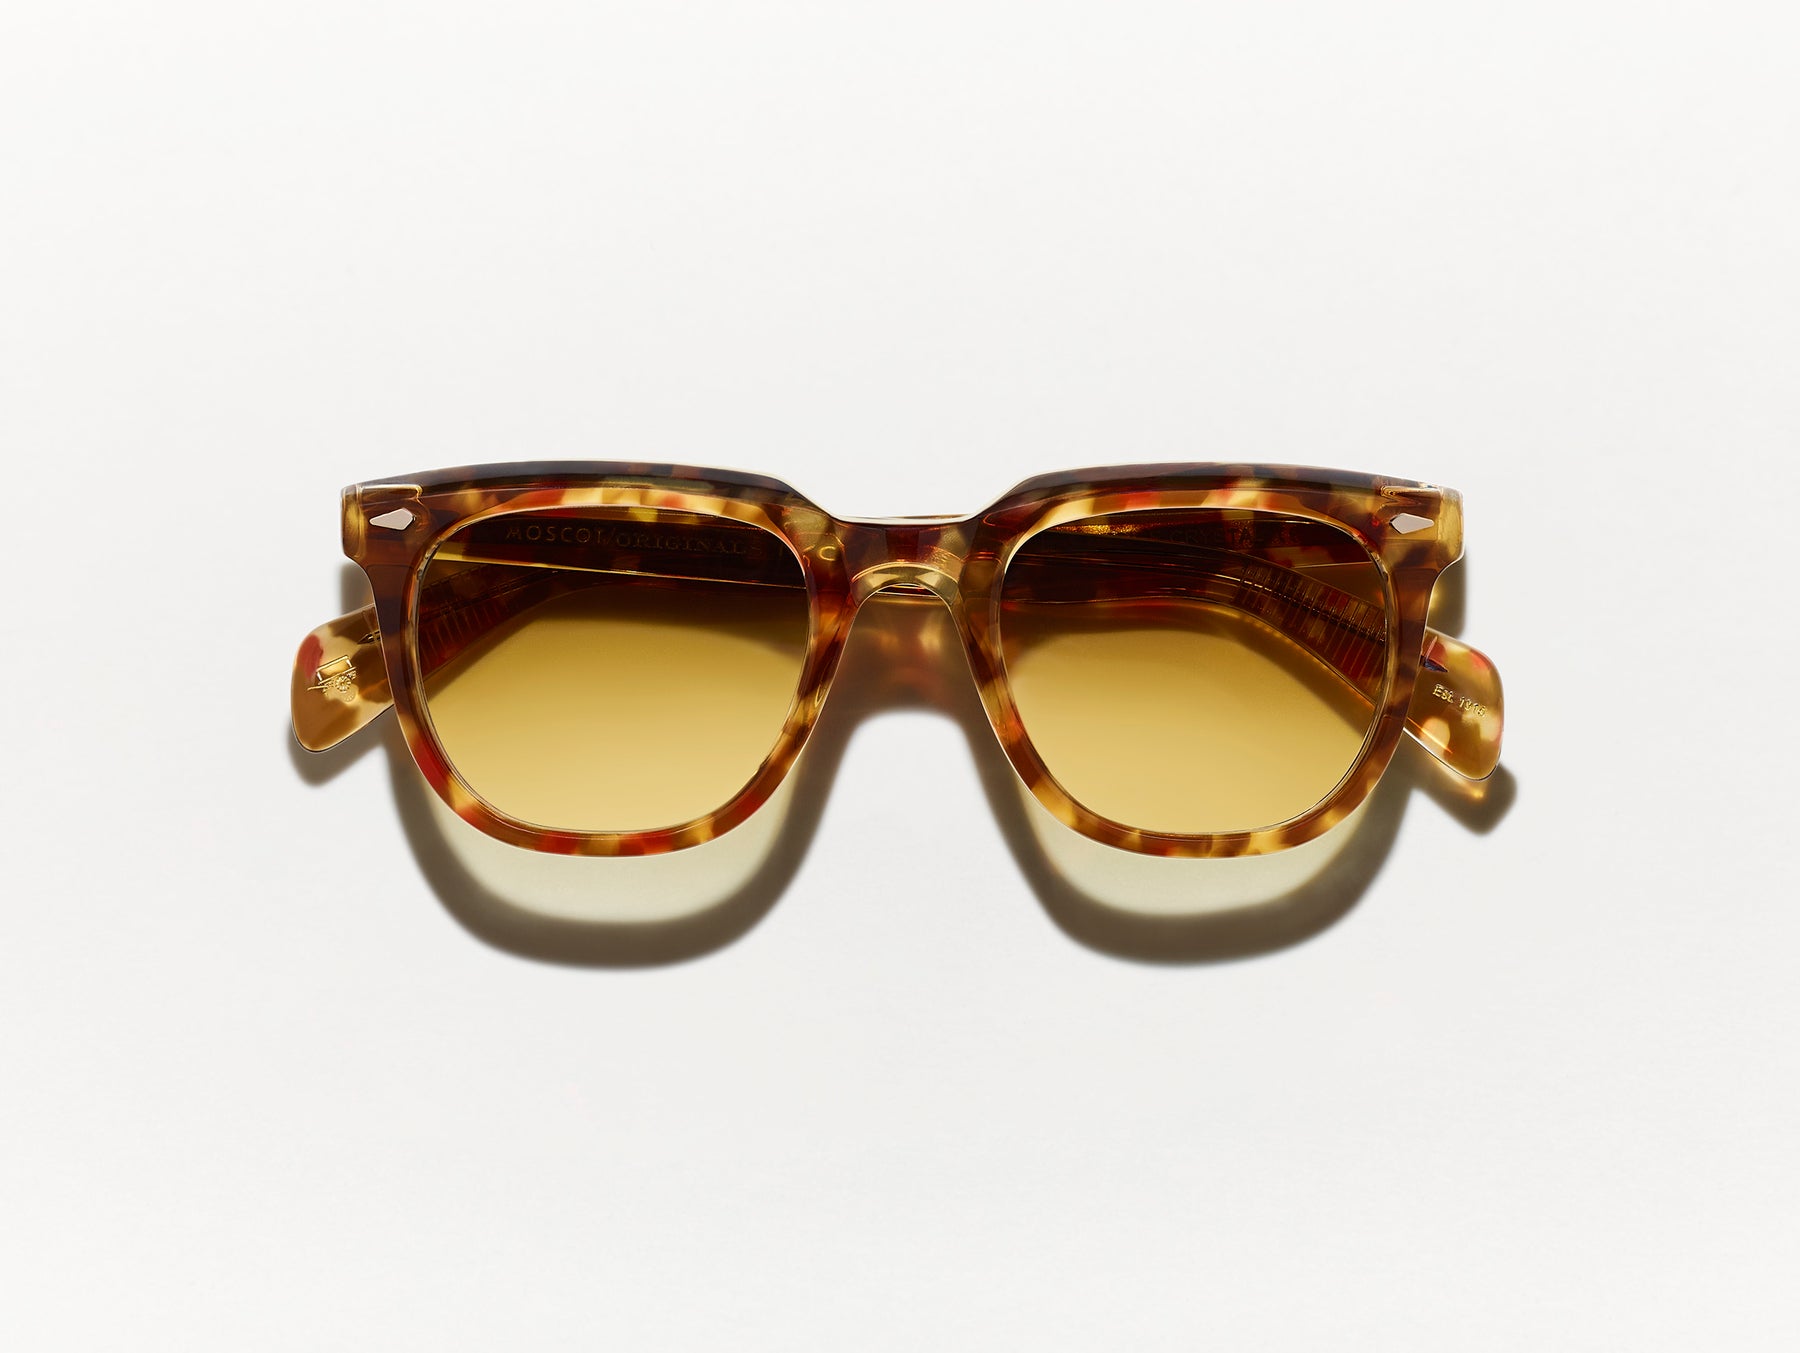 The YONTIF SUN in Tortoise/Crystal with Chestnut Fade Tinted Lenses